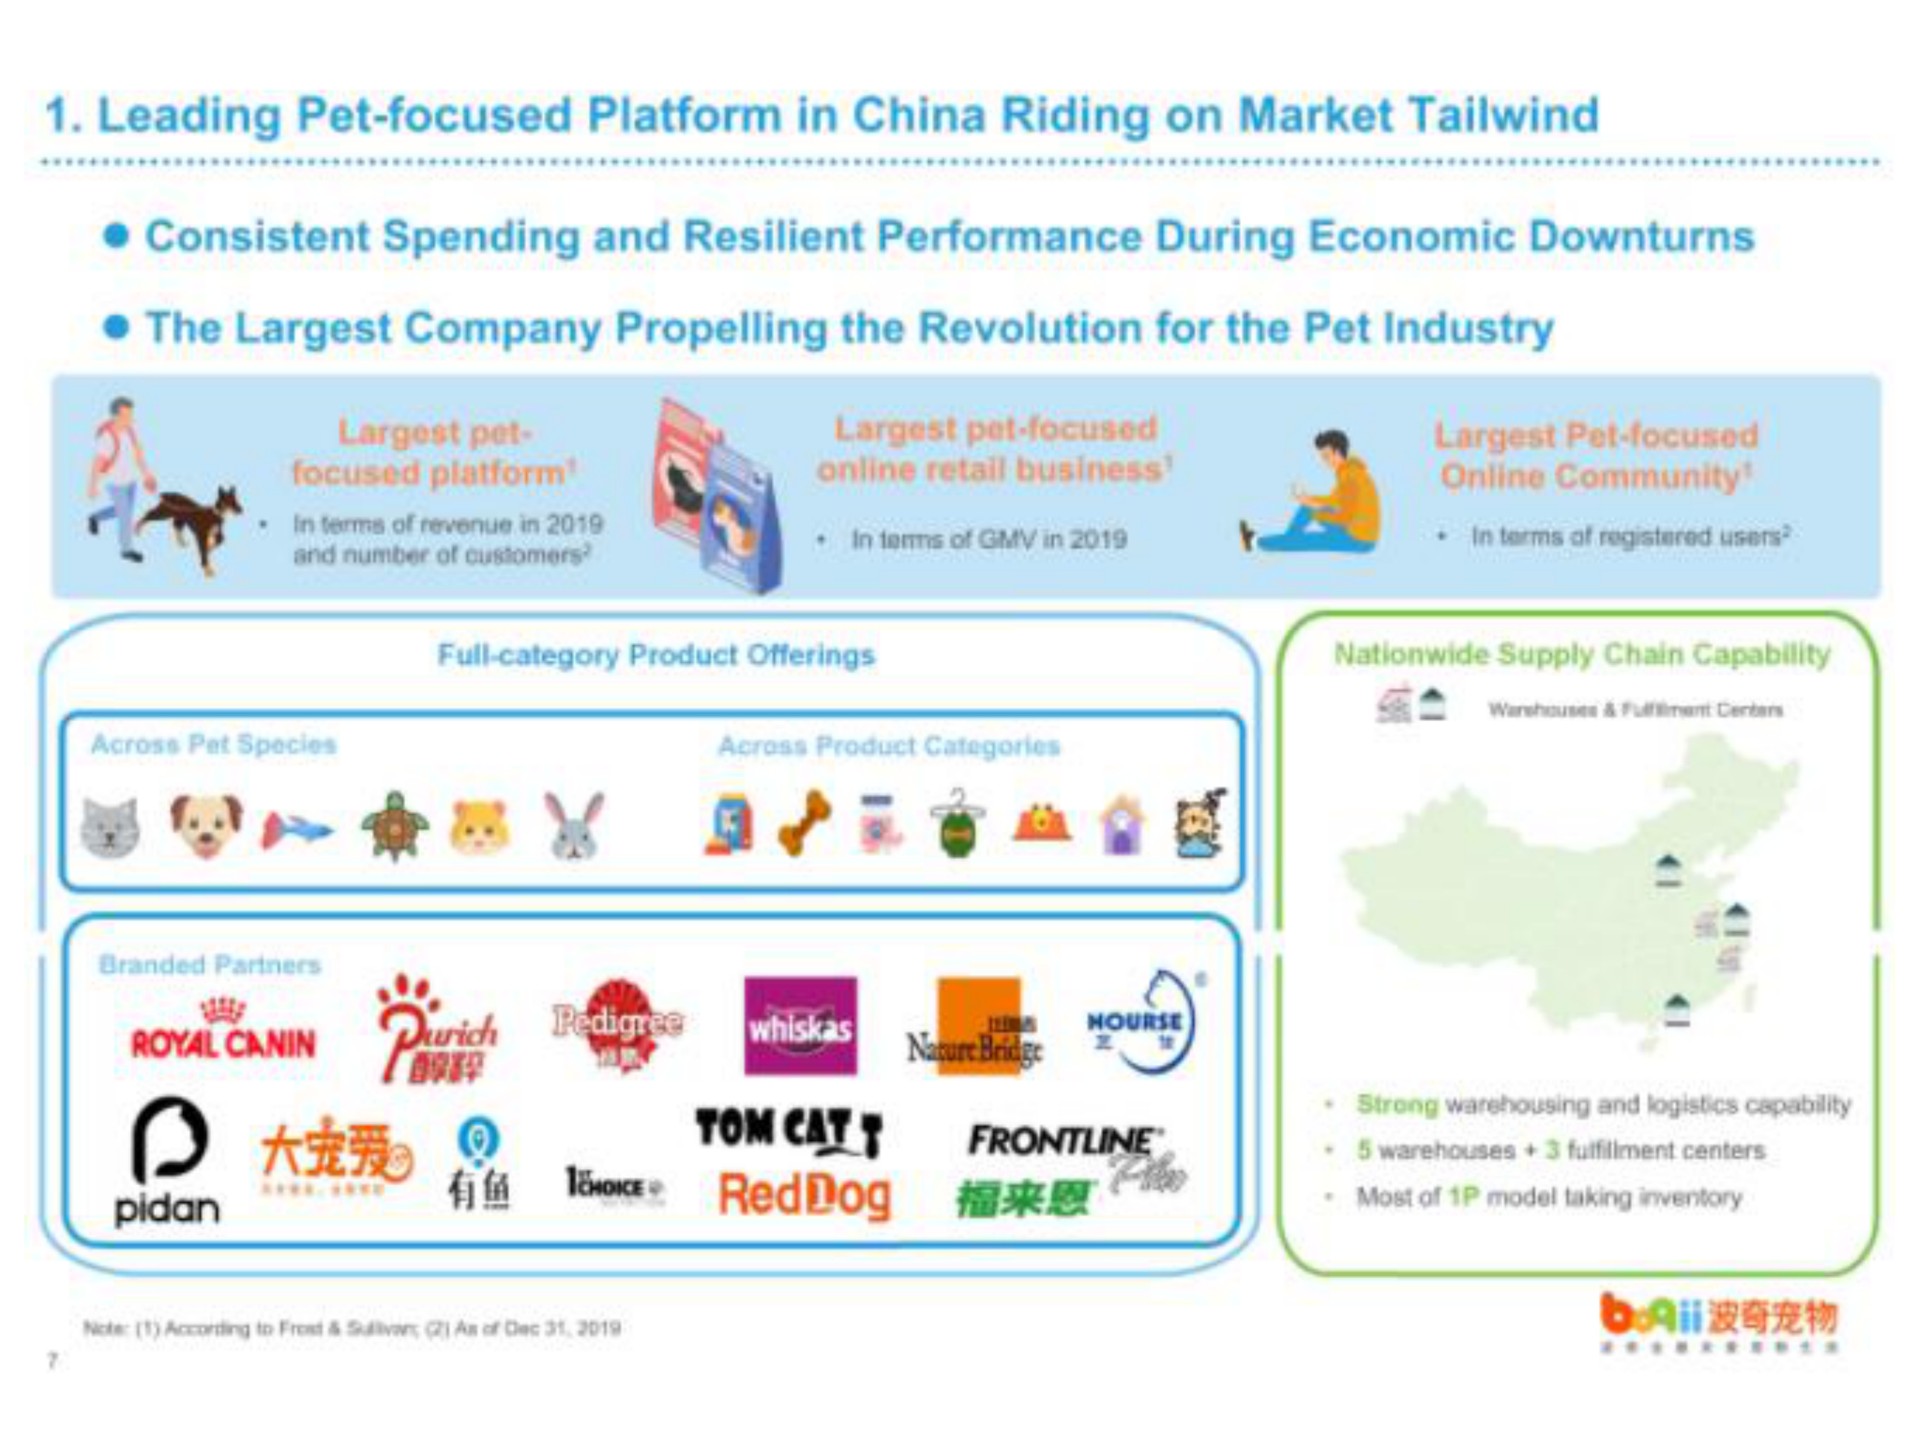 leading pet focused platform in china riding on market consistent spending and resilient performance during economic downturns the company the revolution for the pet industry pet focused platform pet focused retail business in terms of in pet focused community in terms of registered users full category product offerings nationwide supply chain capability so he | Boqii Holding